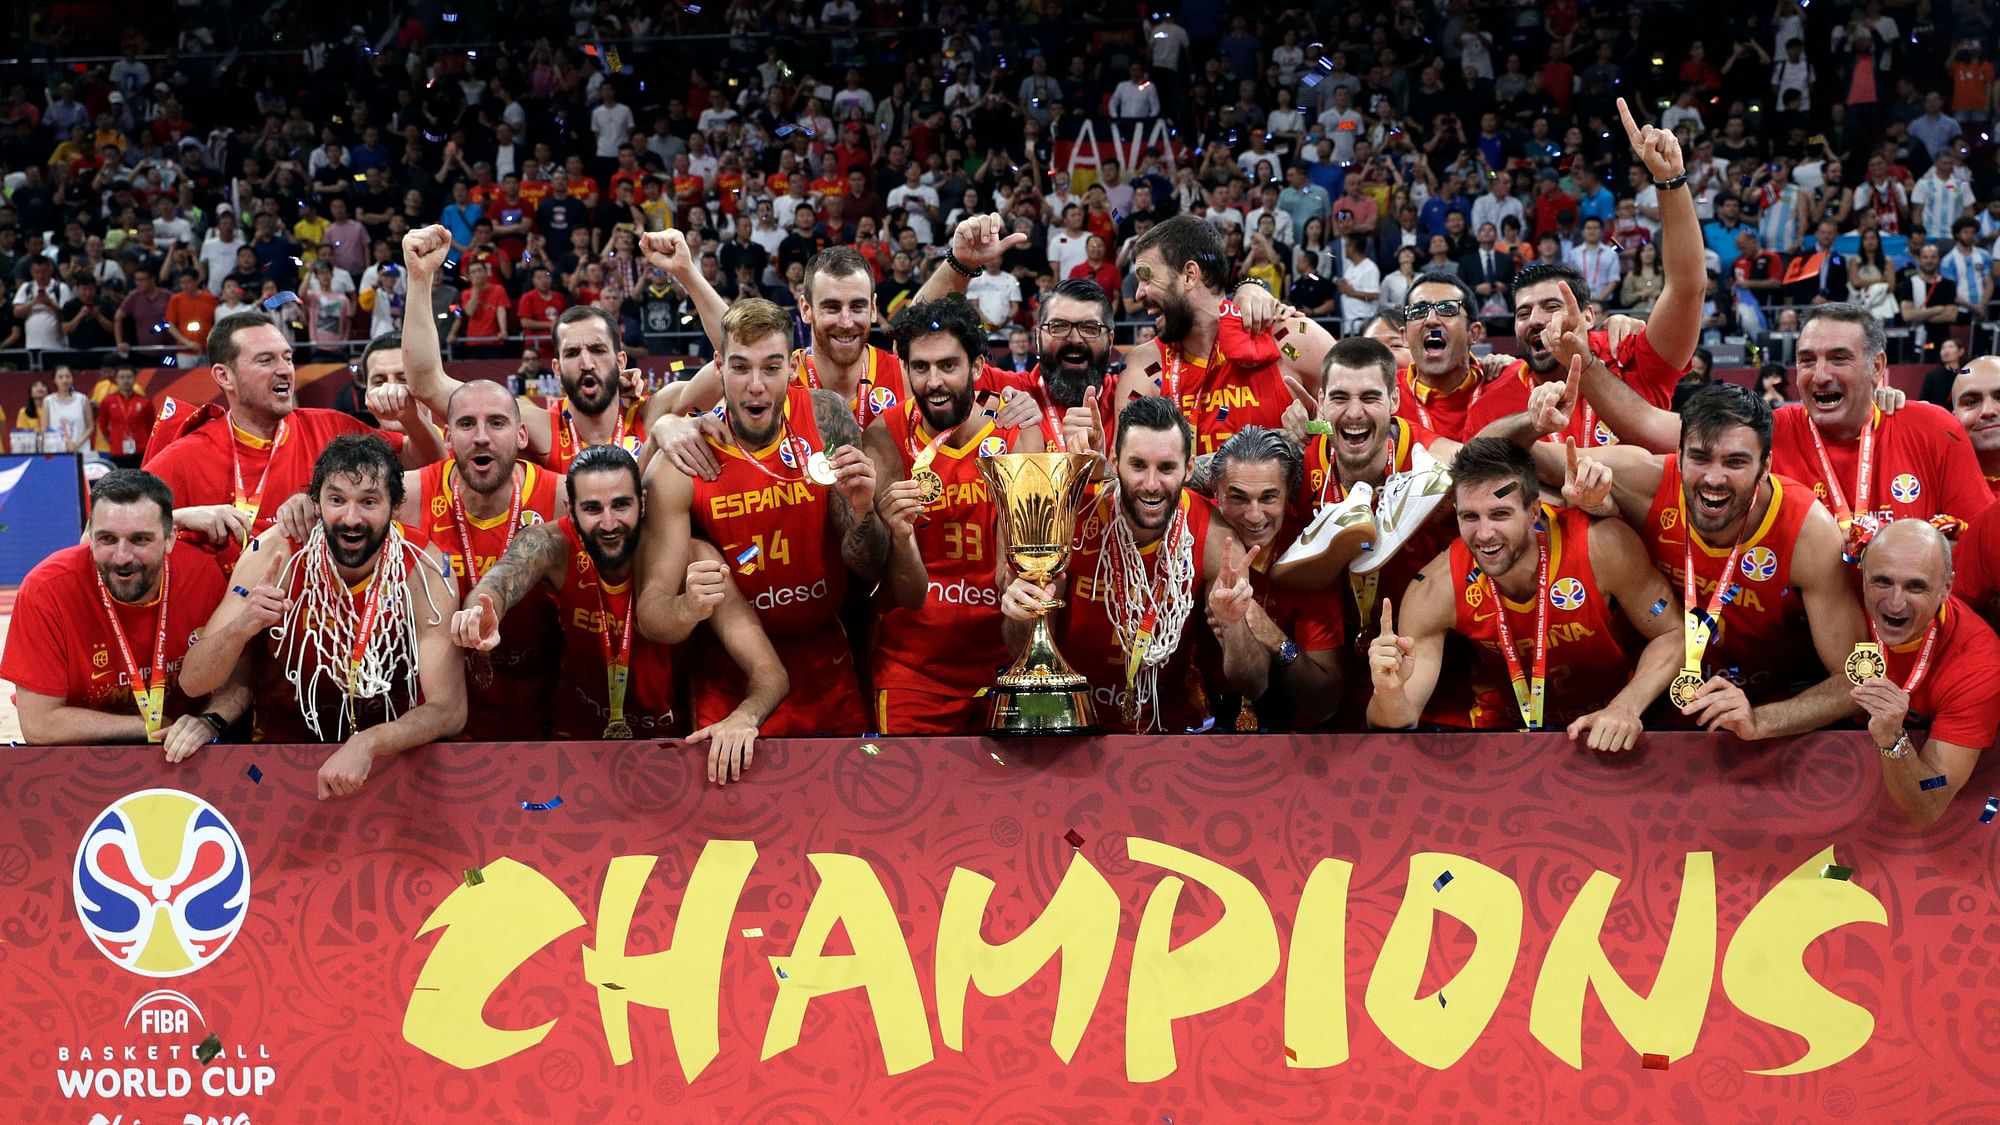 Members of Spain’s team celebrate with the Naismith Trophy after they beat Argentina in their first-place match in the FIBA Basketball World Cup at the Cadillac Arena in Beijing, Sunday, Sept. 15, 2019.